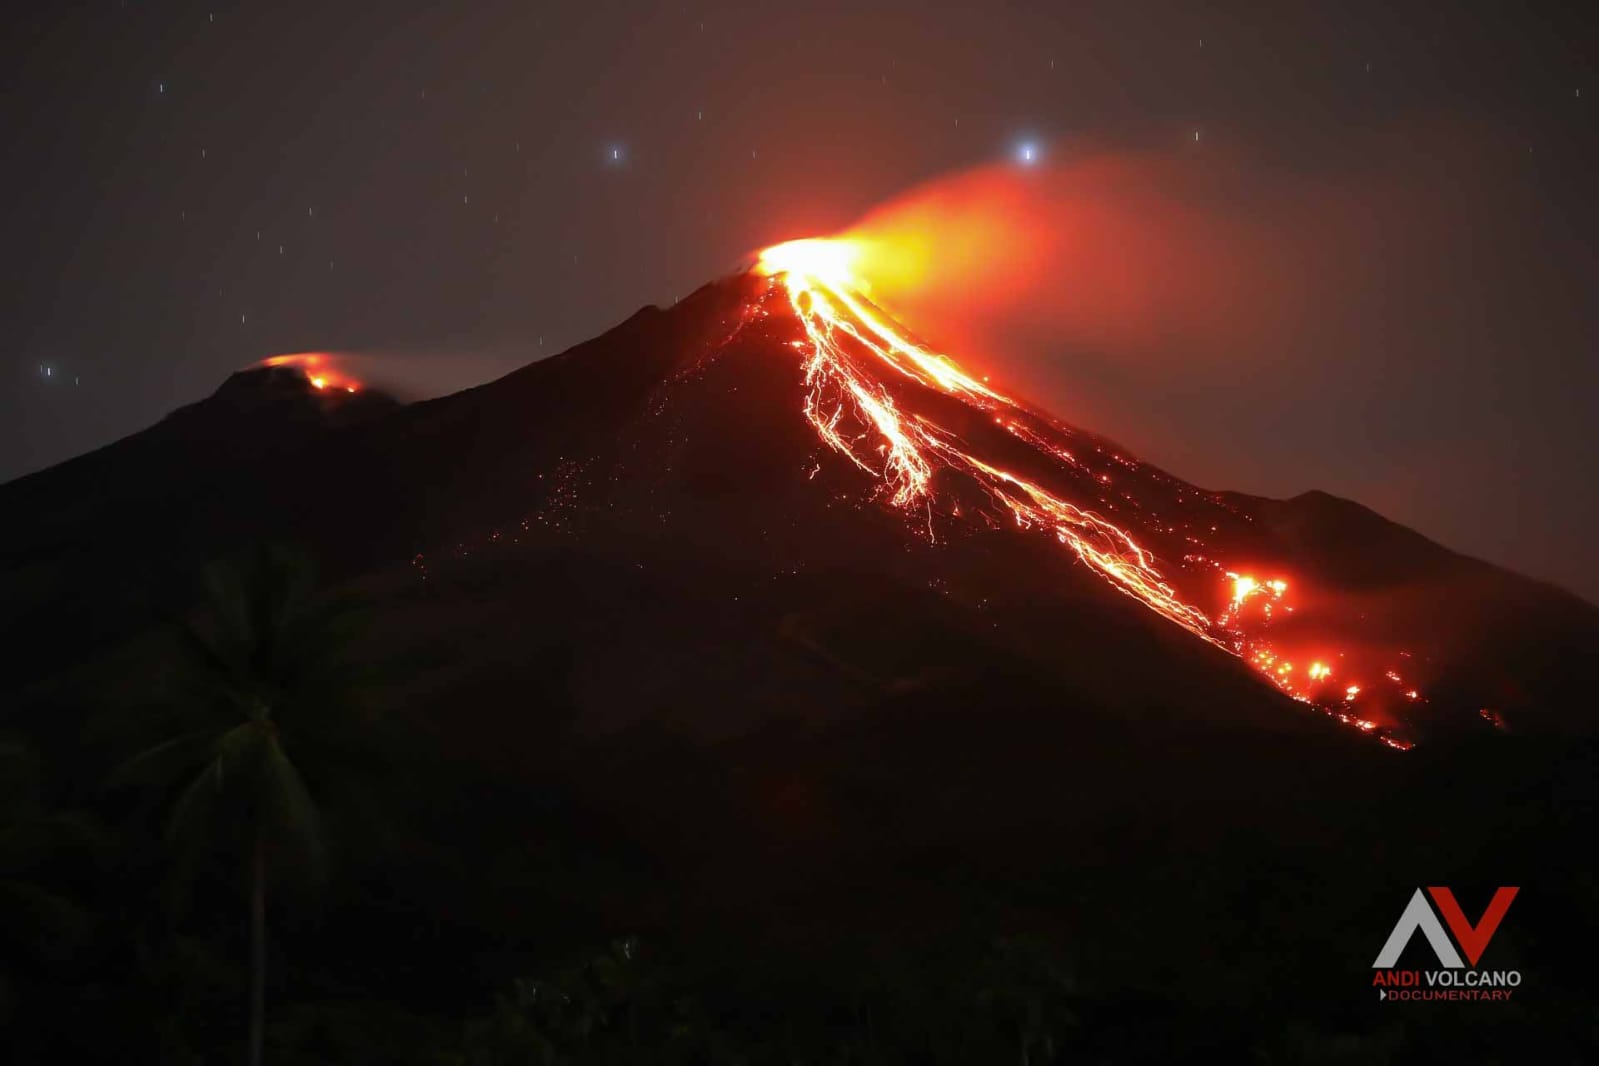 Glowing lava blocks emanating from the lava dome (image: Andi/VolcanoDiscovery Indonesia)